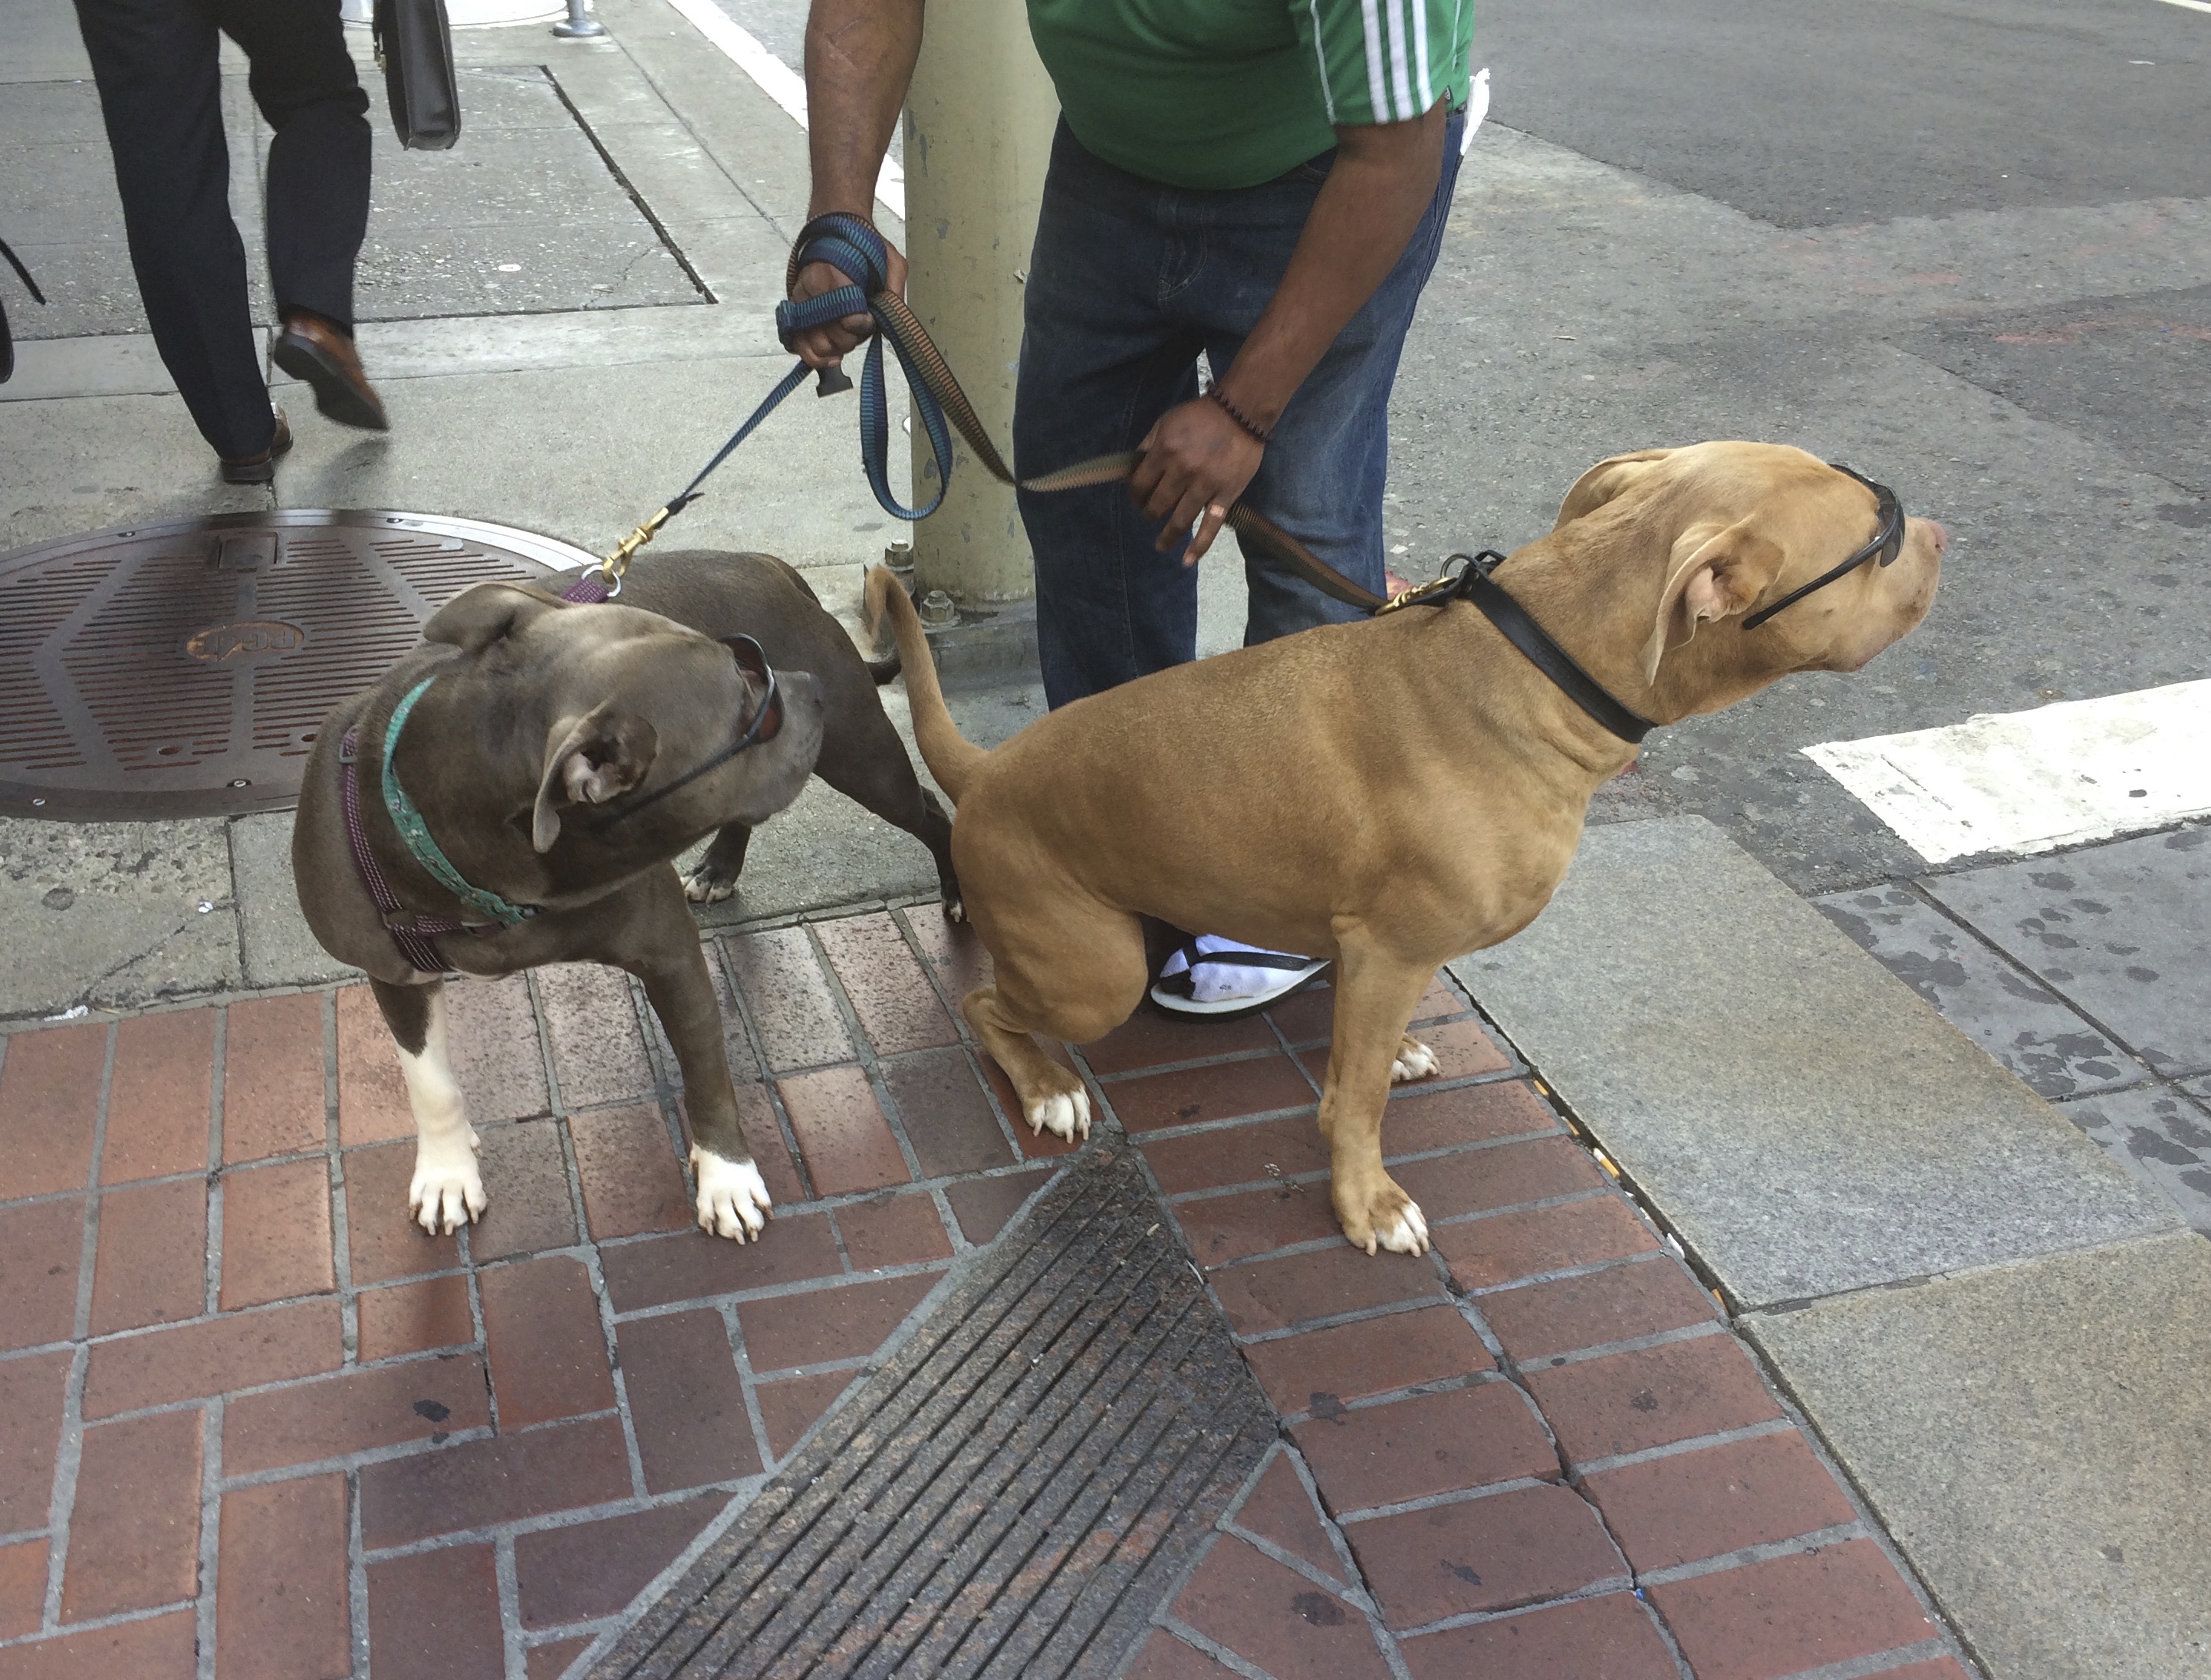 Fawn Pit Bull And Blue Pit Bull, Both Wearing Sunglasses